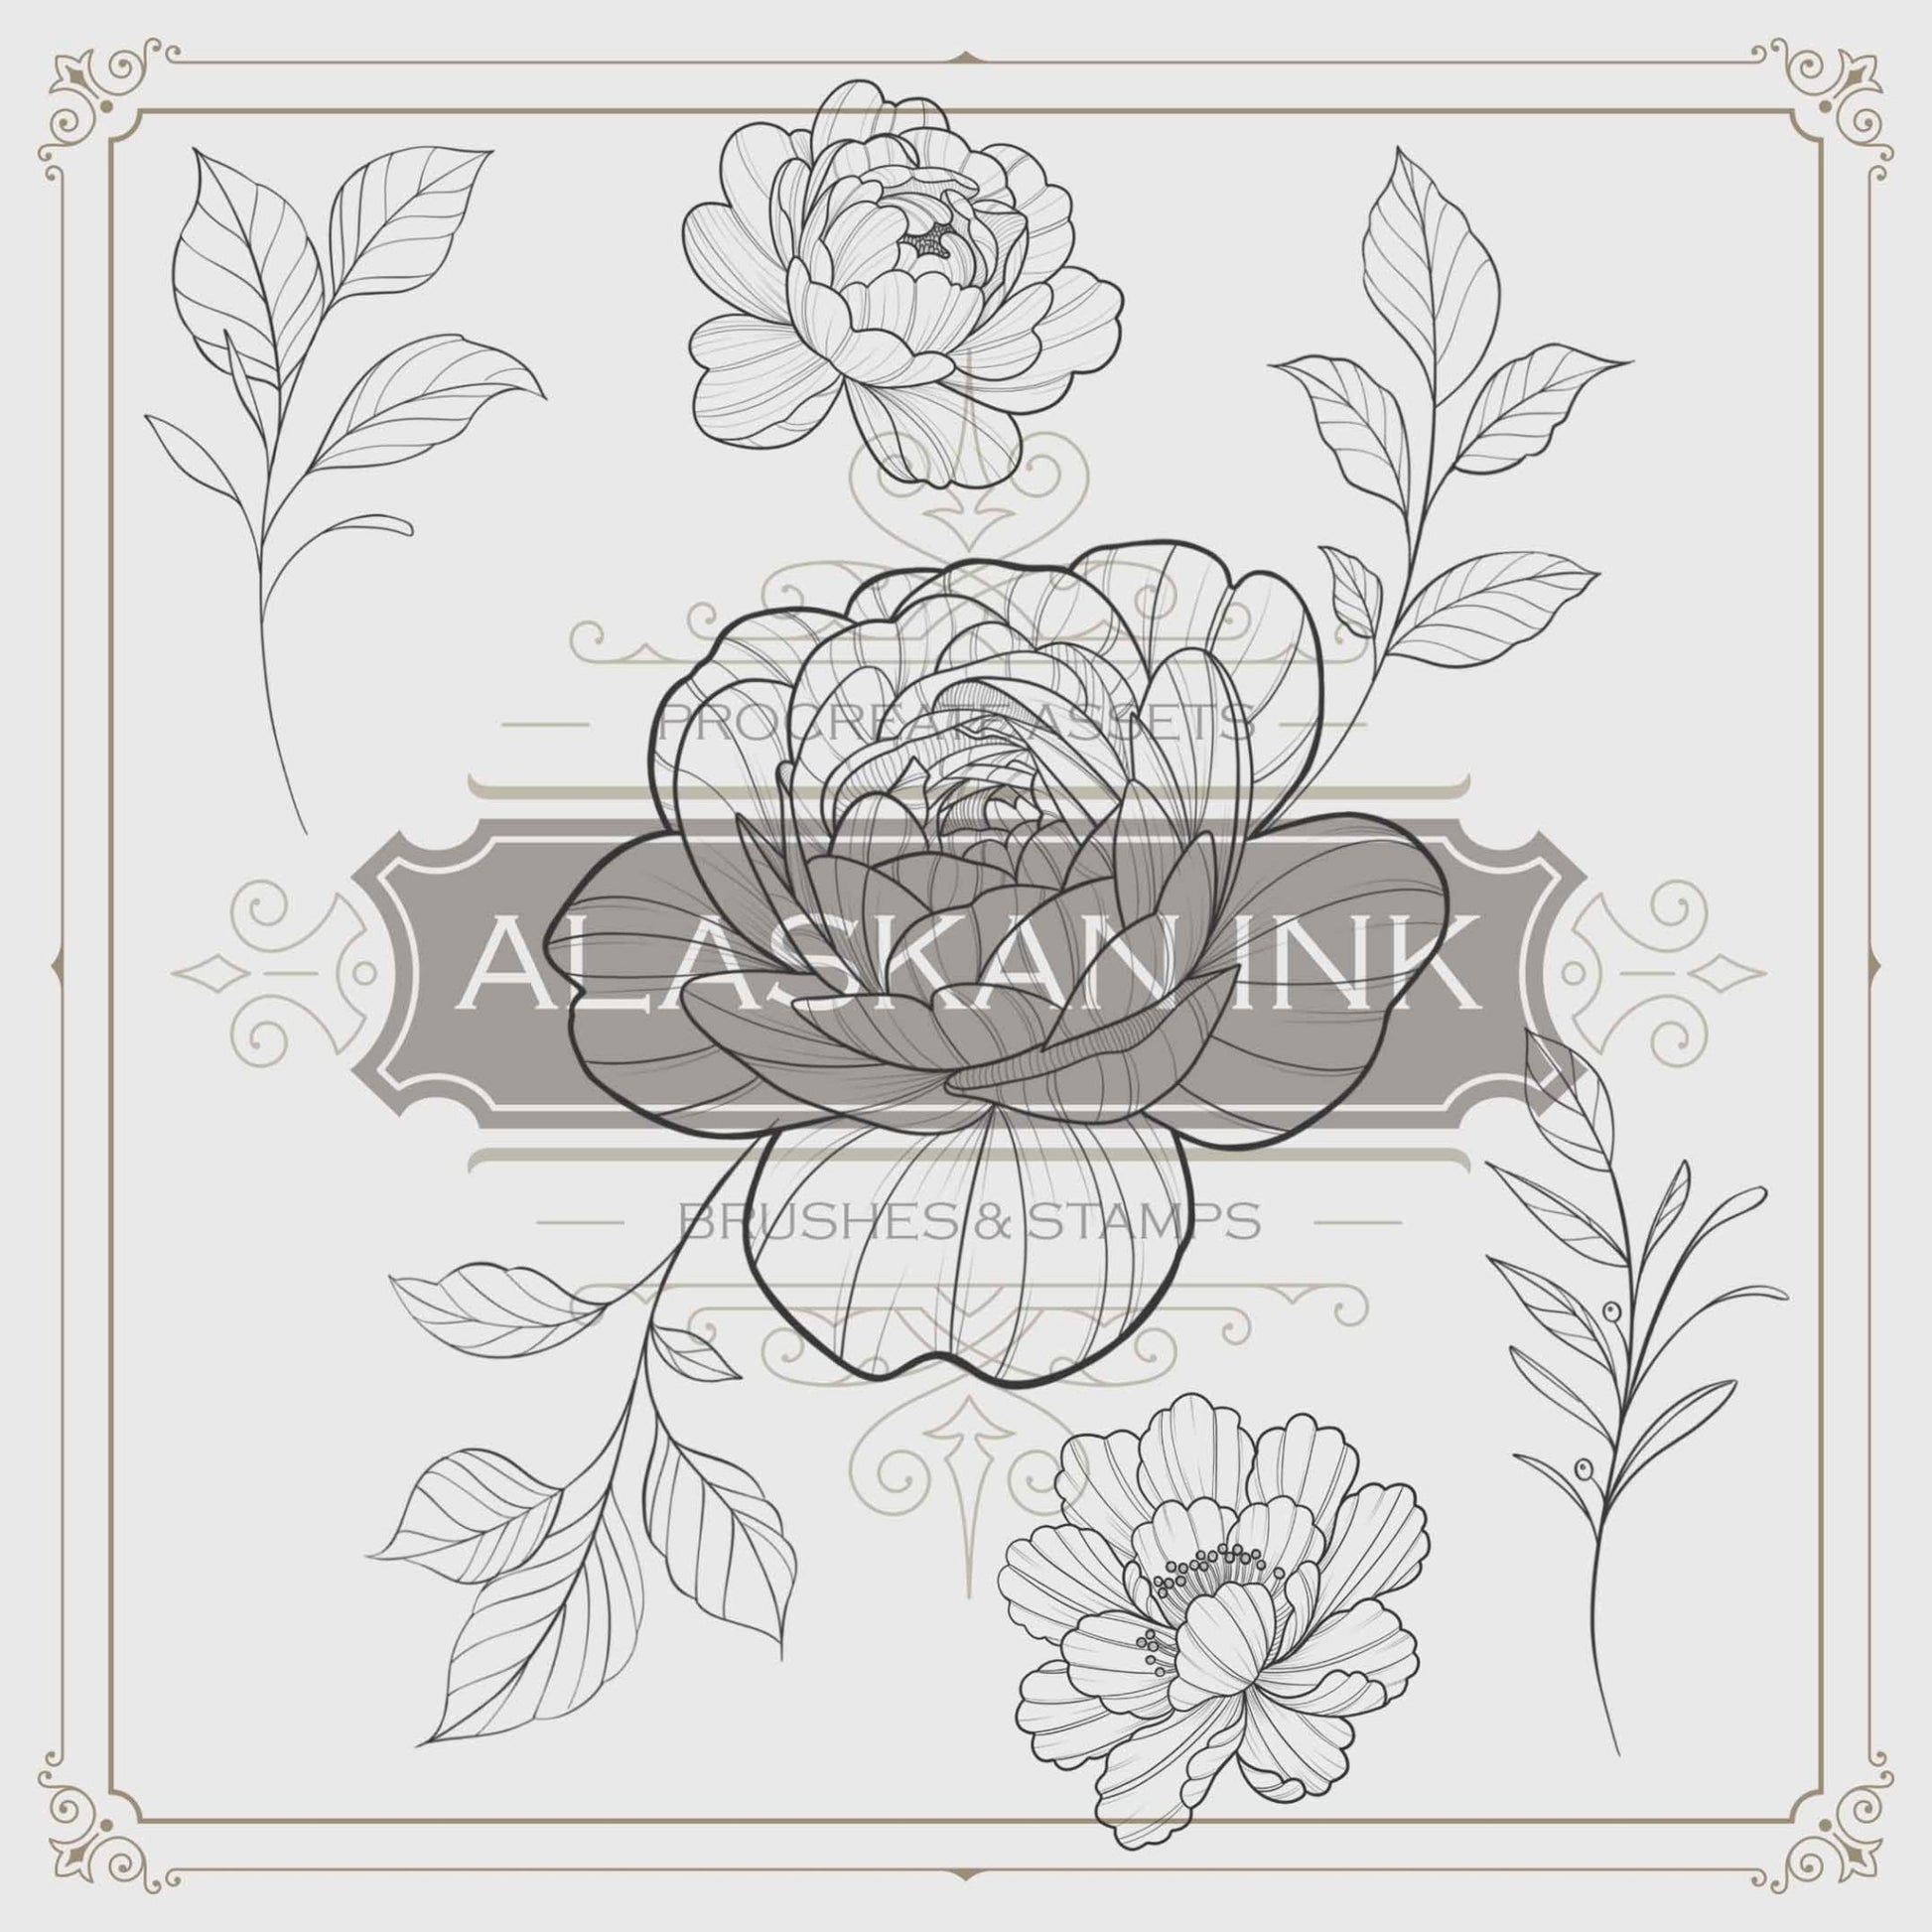 400 Flowers Tattoo Brushes for Procreate application created by Alaskan ink studio